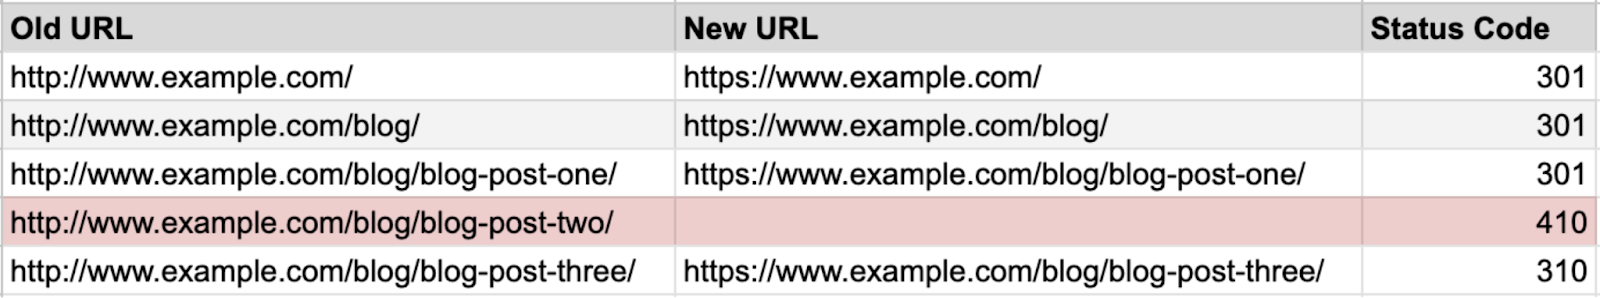 A section of a URL map, showing old URL, new URL, and status code columns